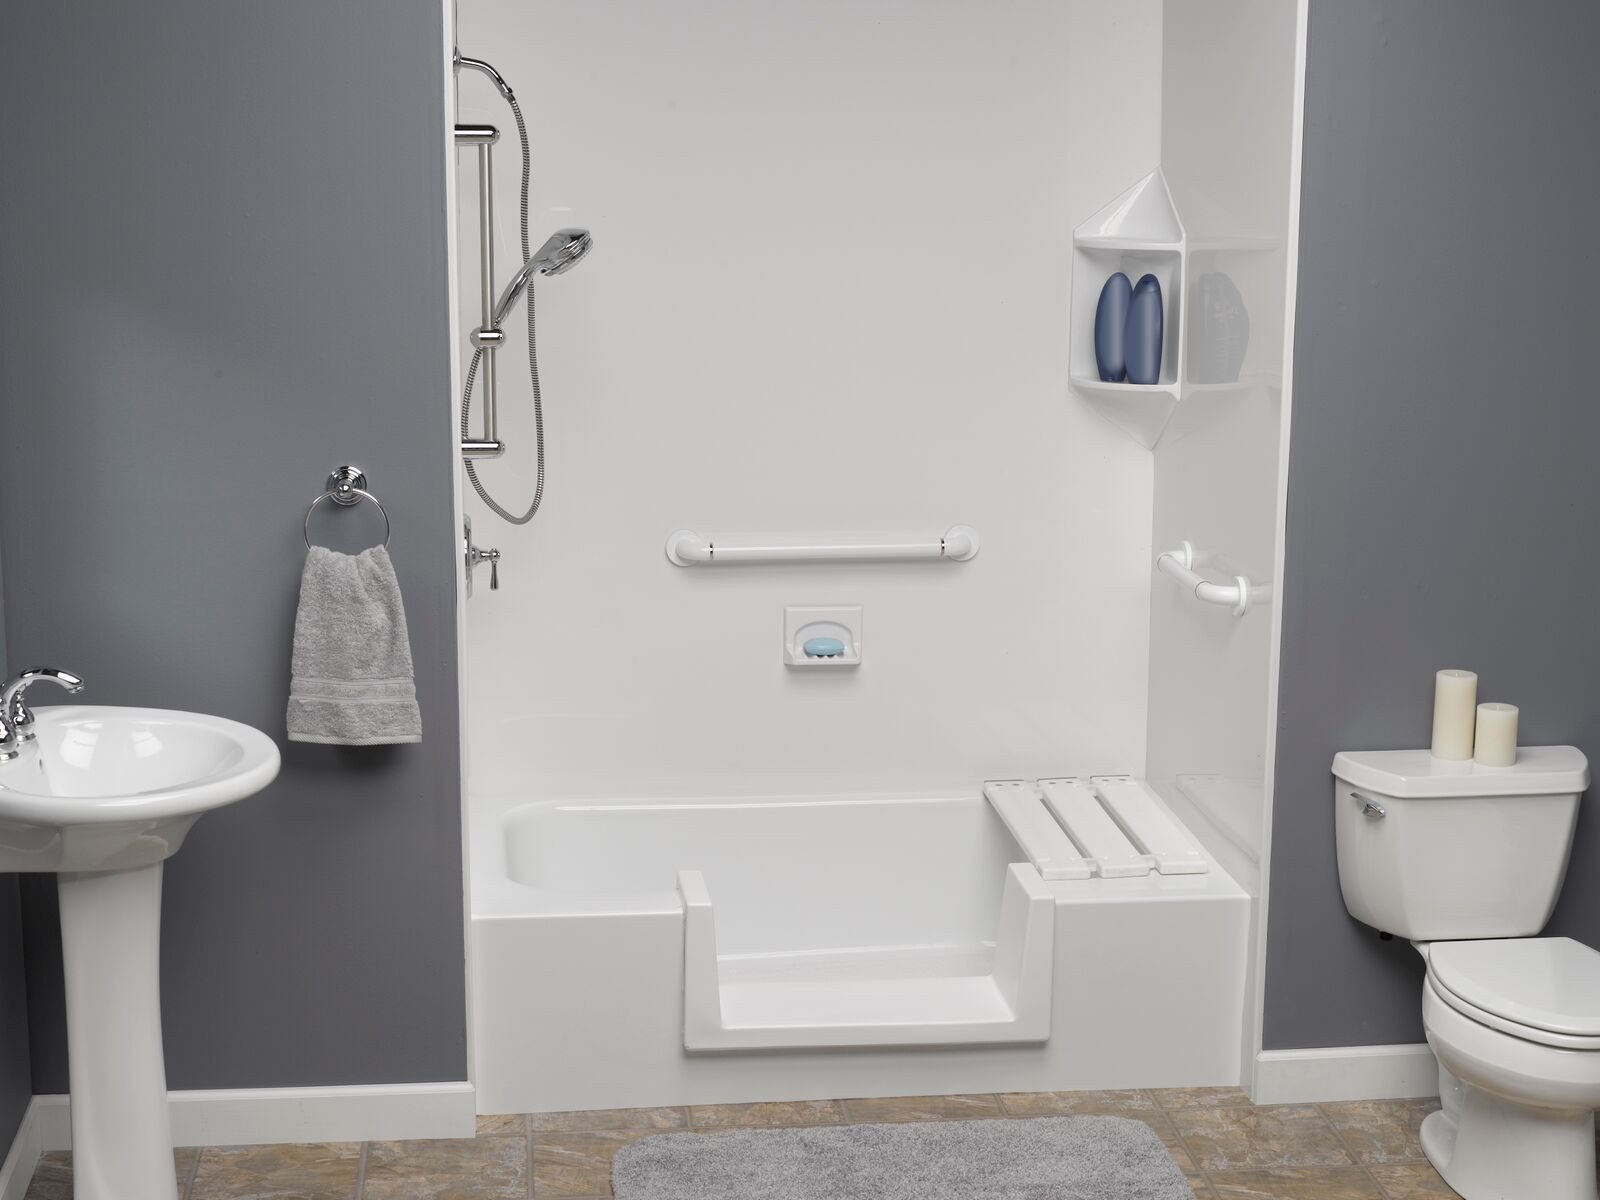 How To Replace A Bathtub With A Shower?